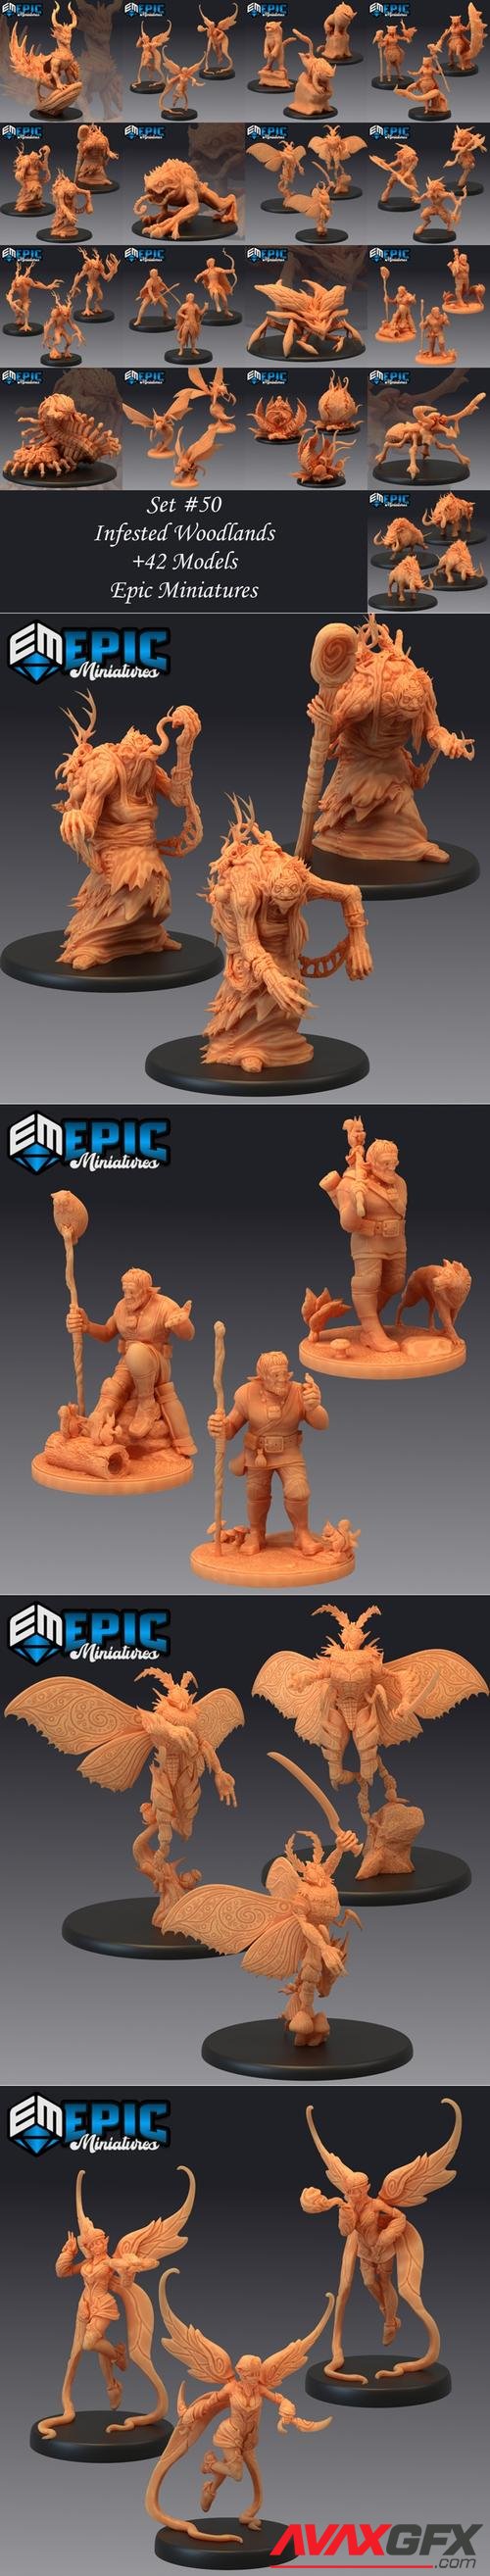 Epic Miniatures - Infested Woodlands – 3D Print